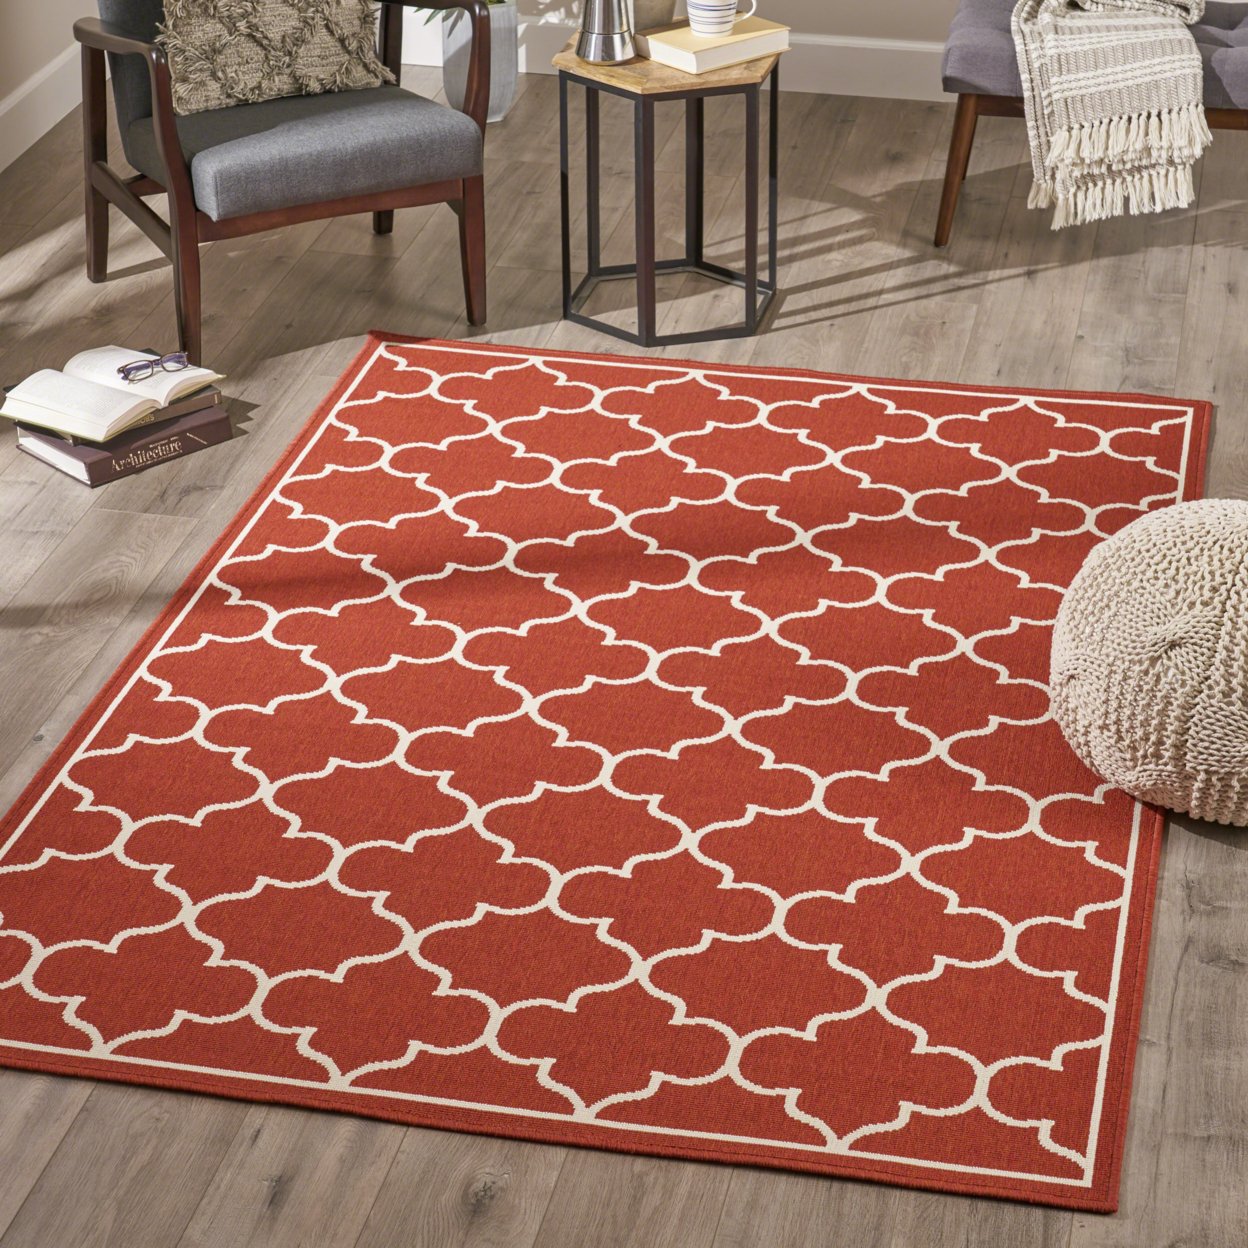 Marcy Indoor Geometric Area Rug, Red And Ivory - Red + Ivory, 5' X 8'